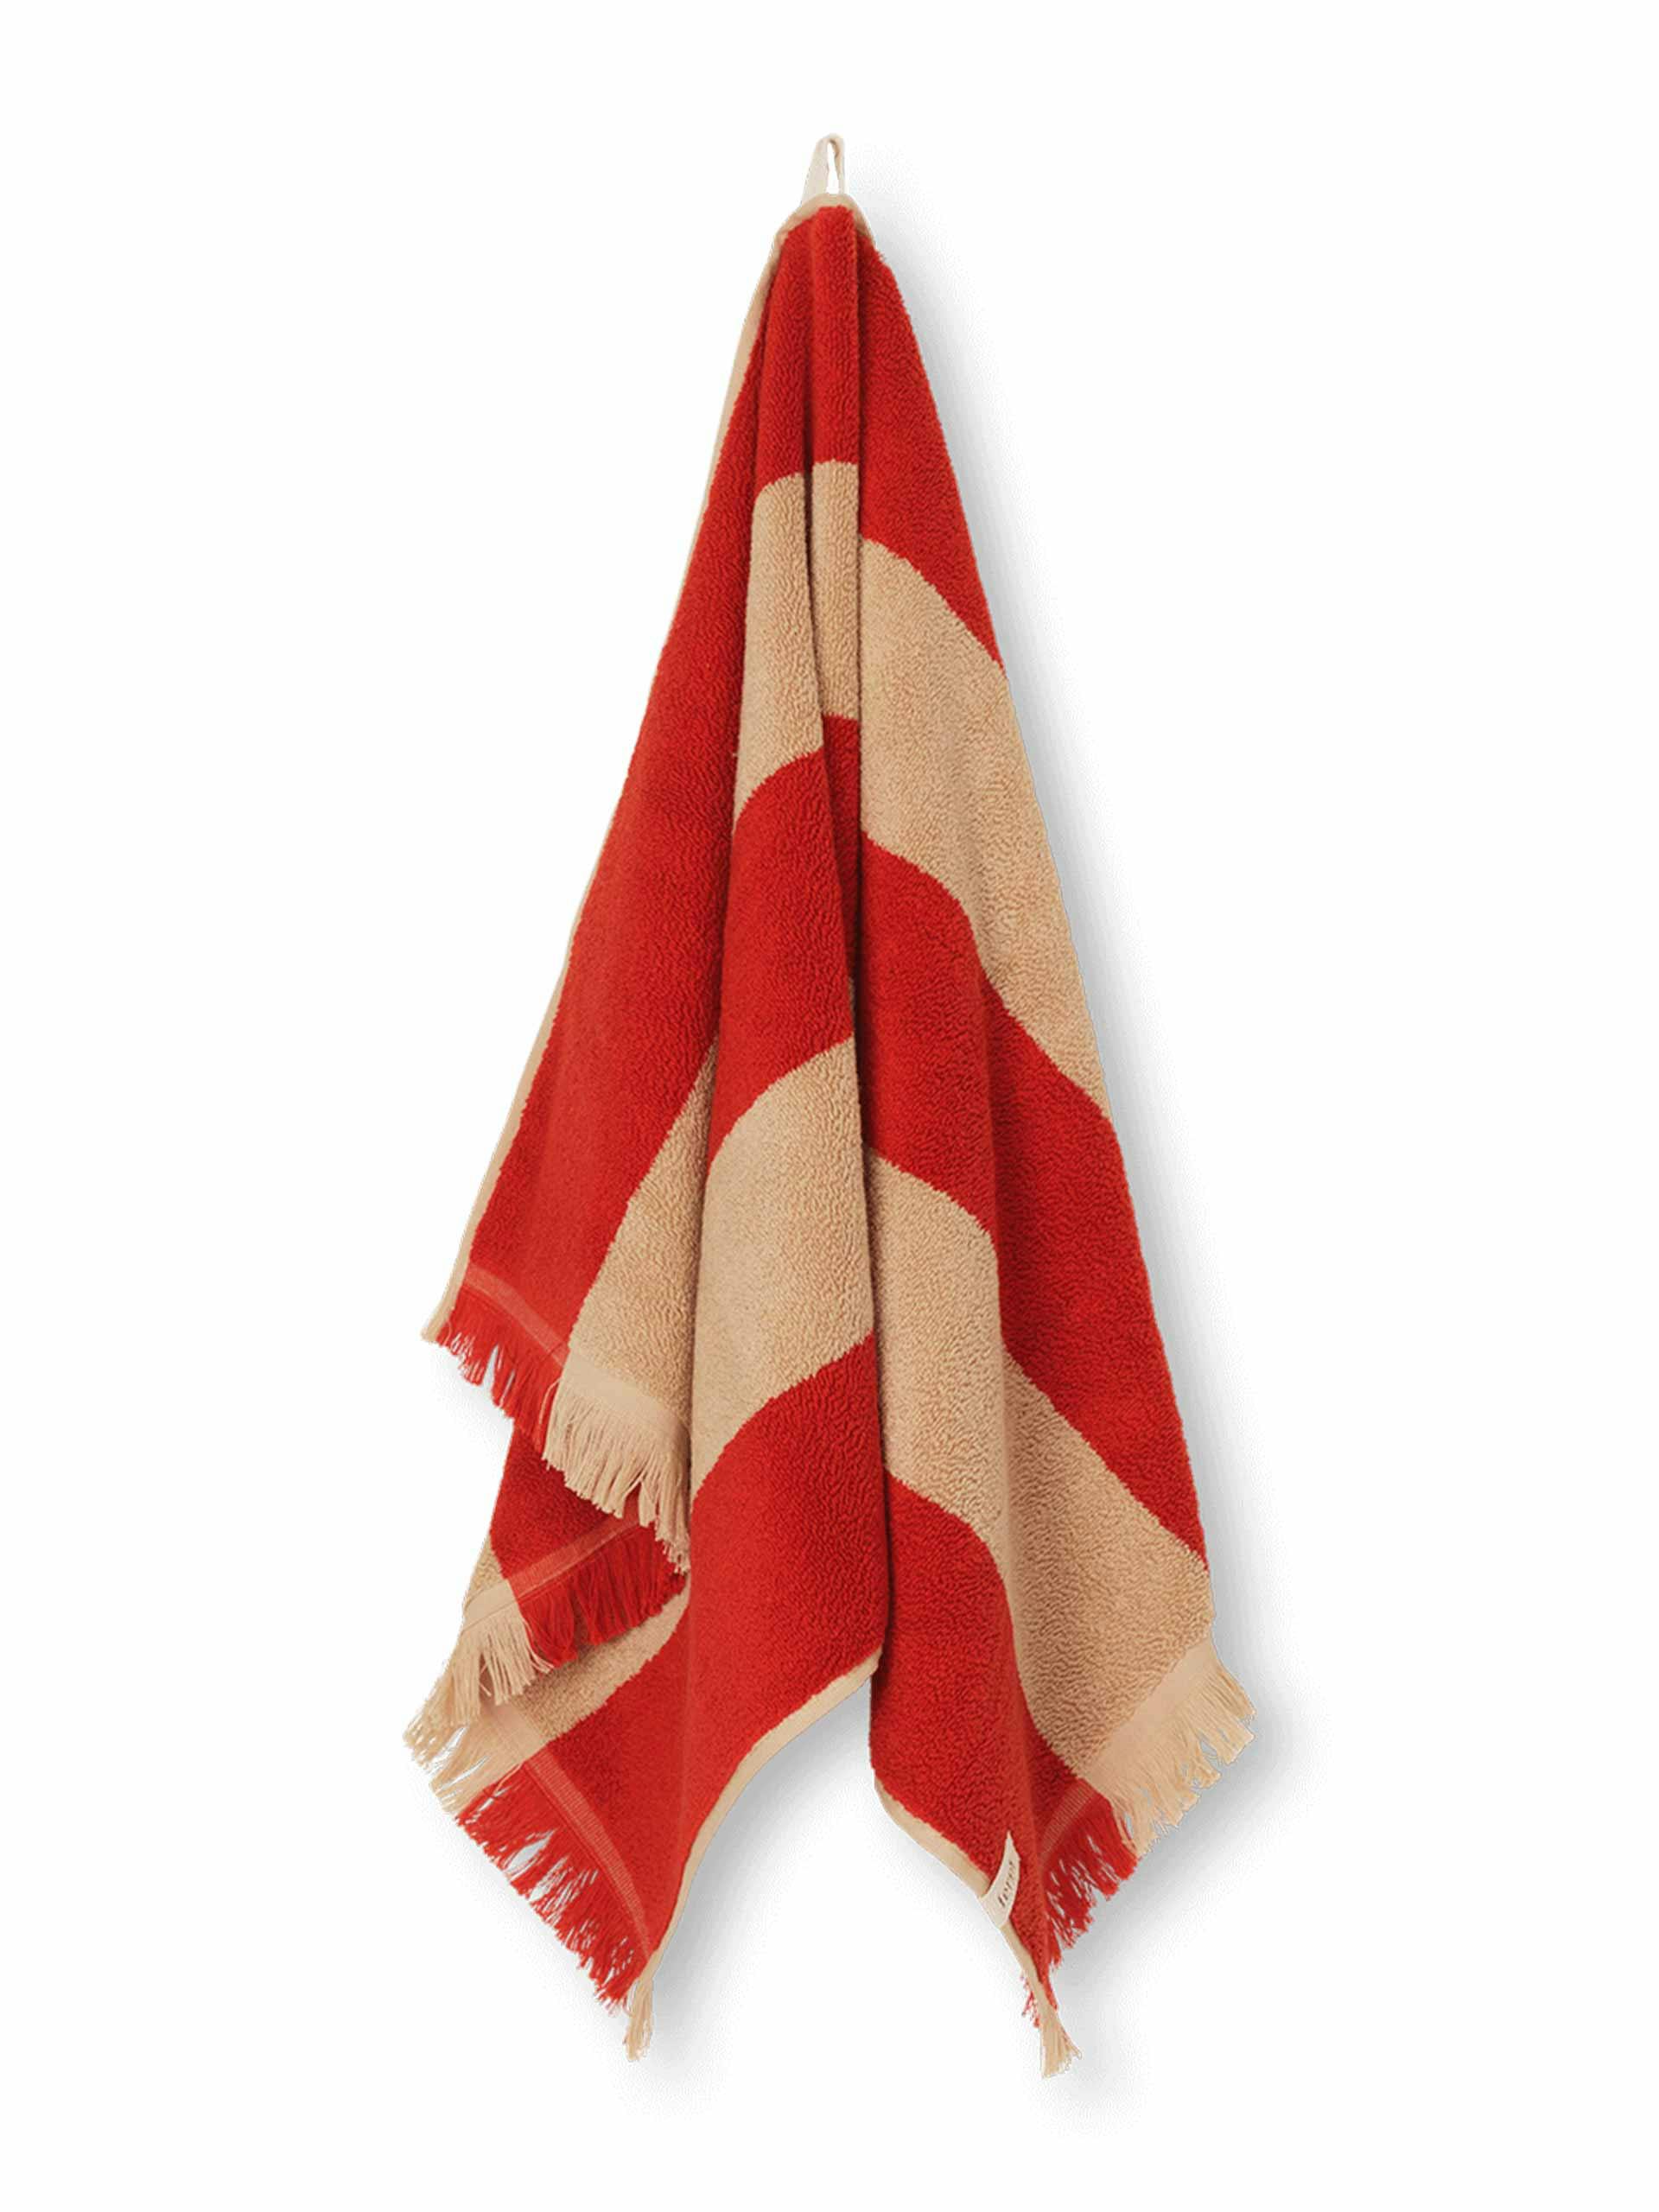 Red and beige striped hand towel